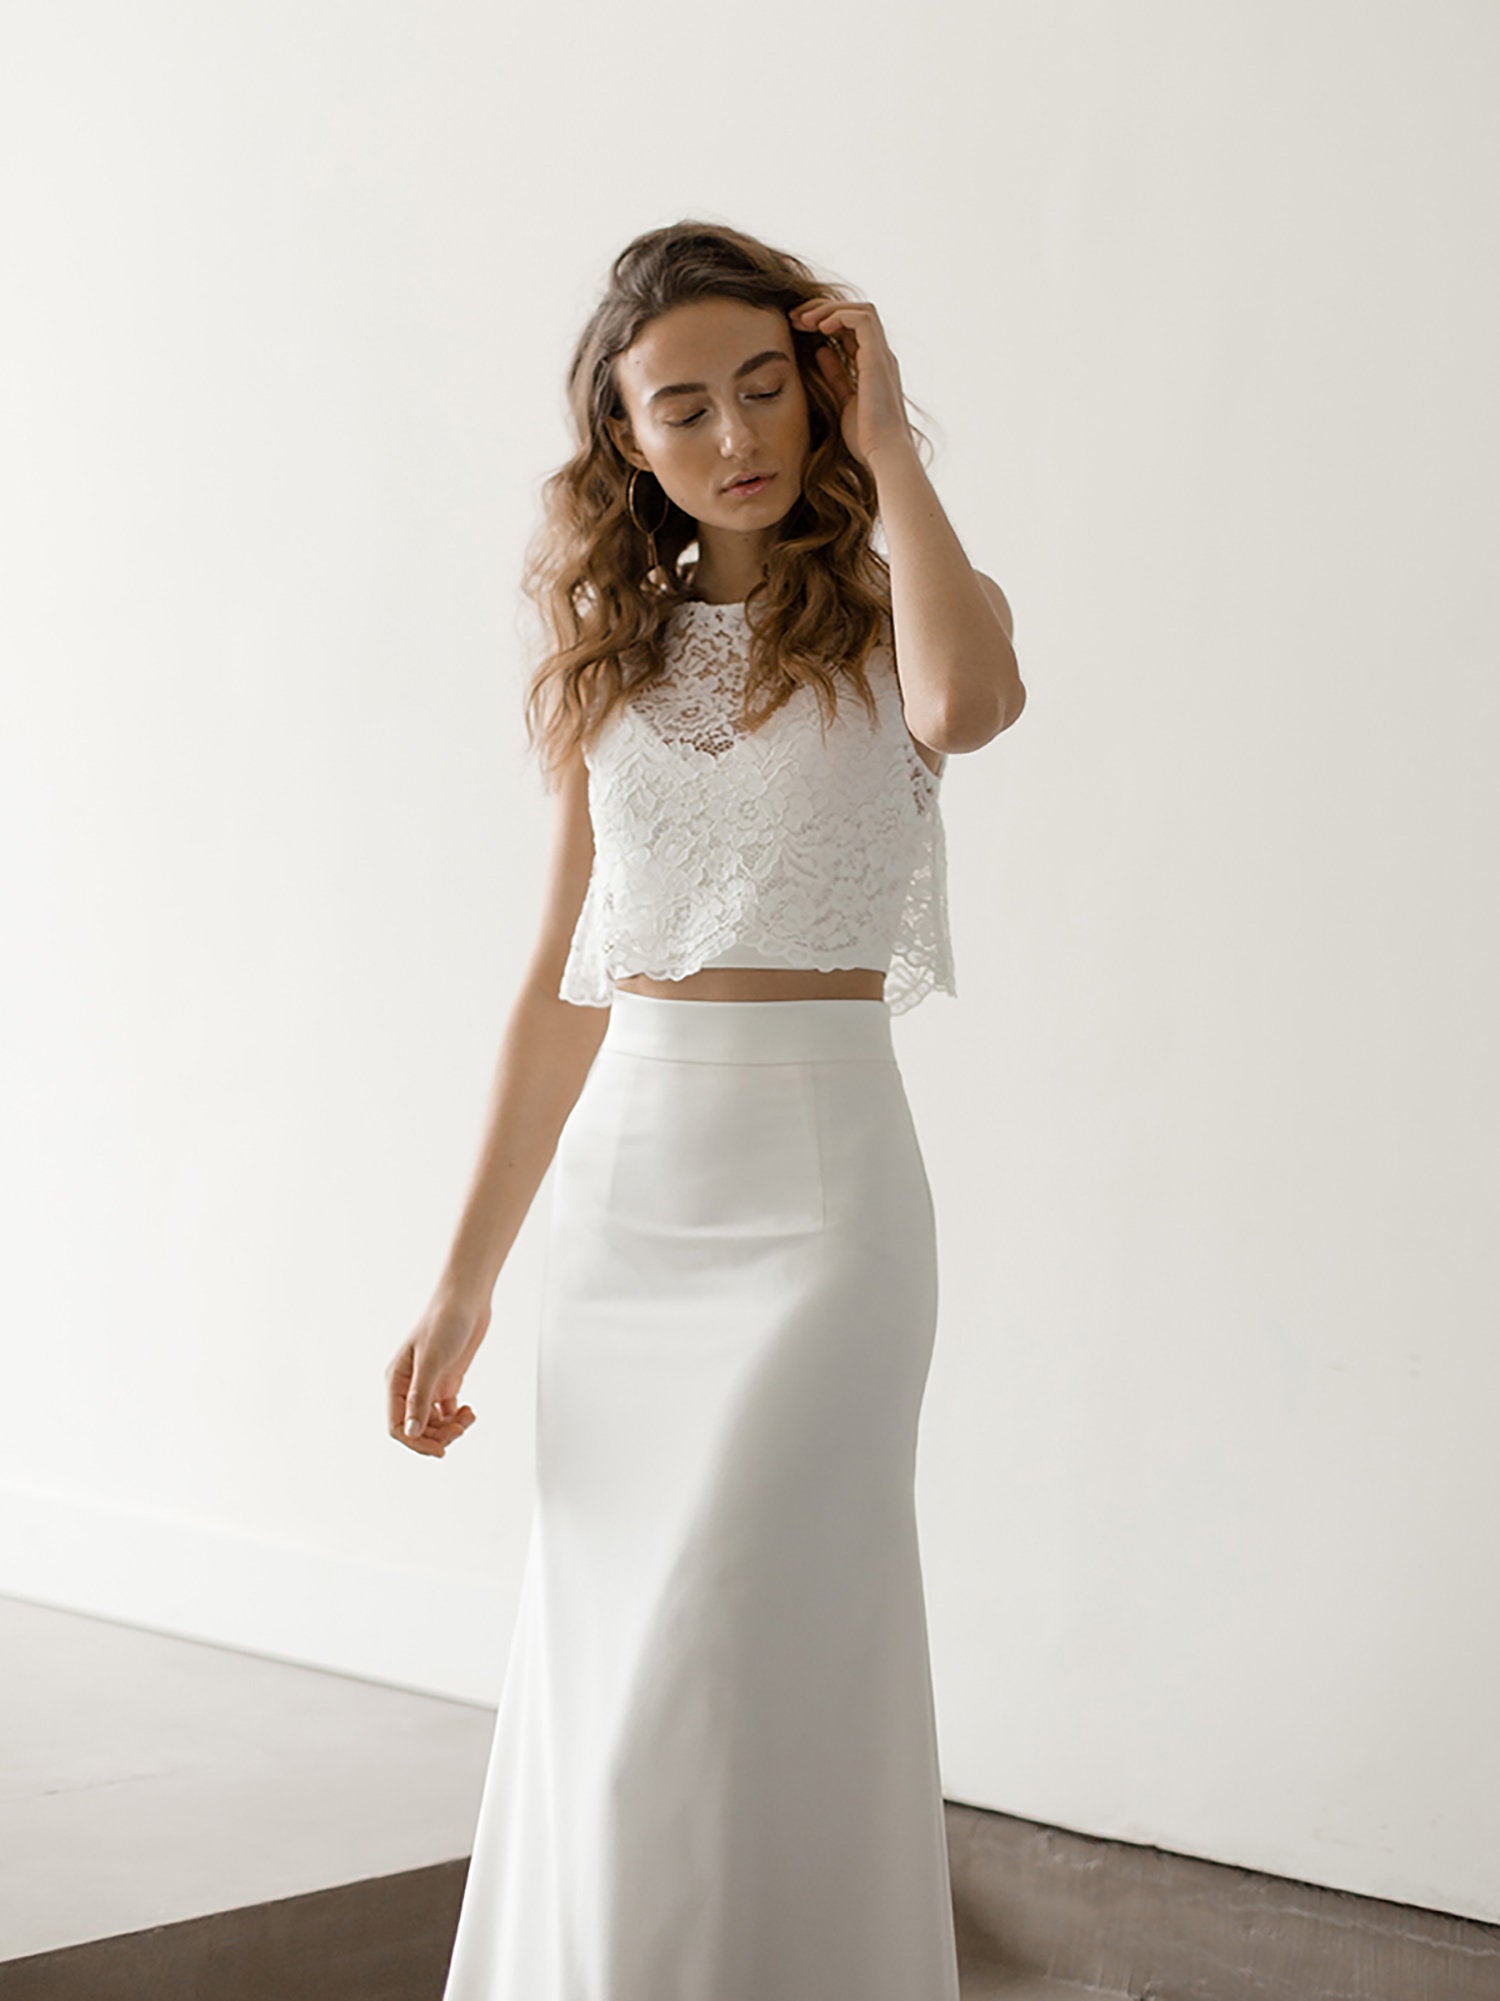 A model wears wedding separates with a lace top.